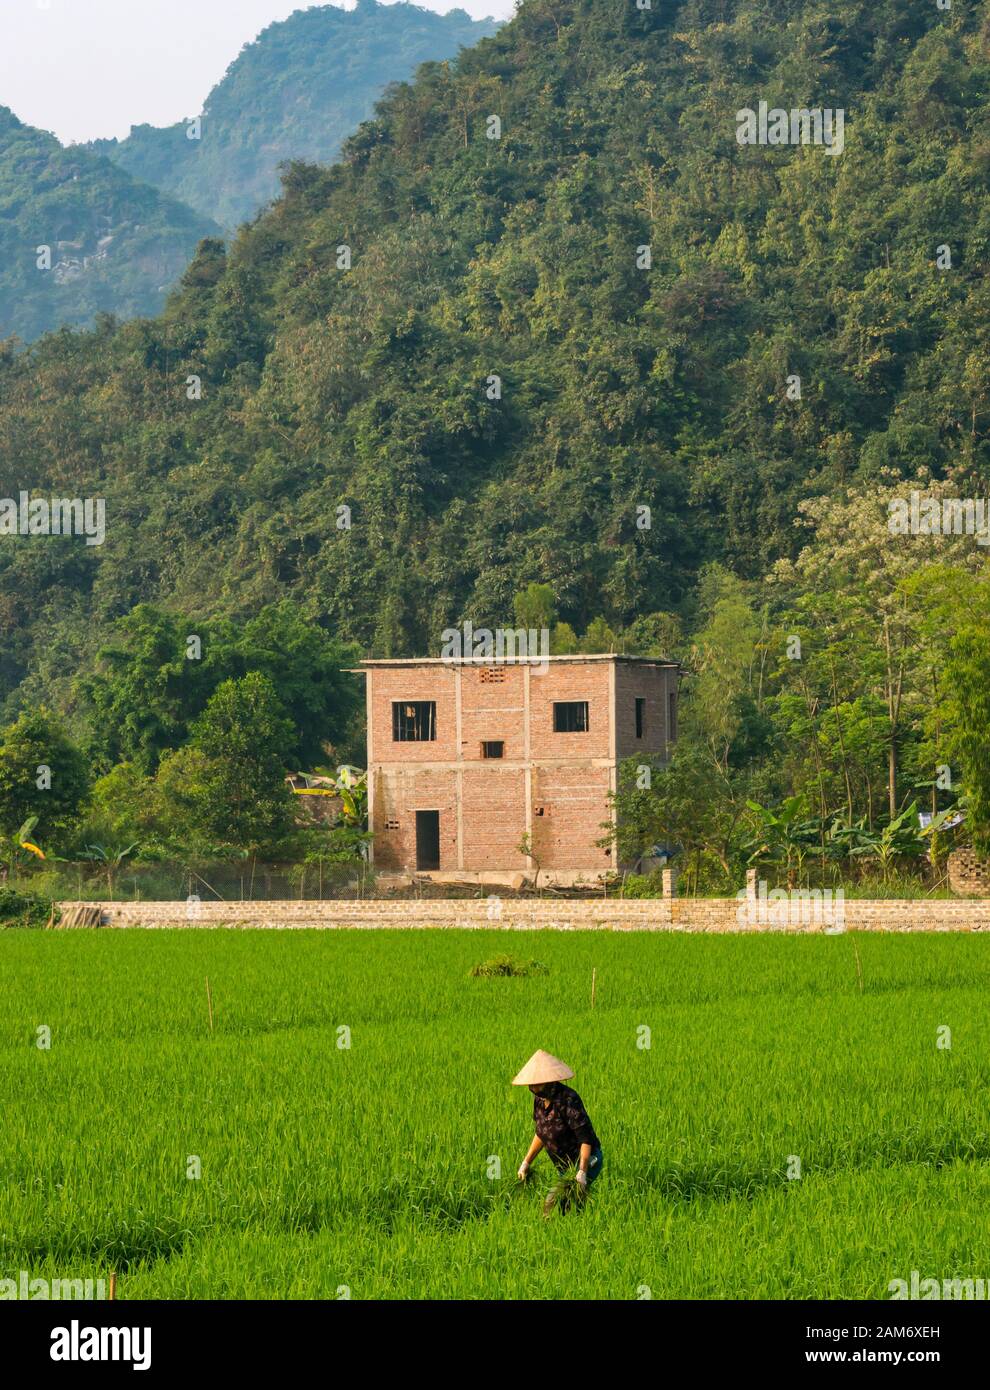 Local woman wearing conical hat working in rice paddy fields with view of limestone karst mountains, Tam Coc, Ninh Binh, Vietnam, Asia Stock Photo